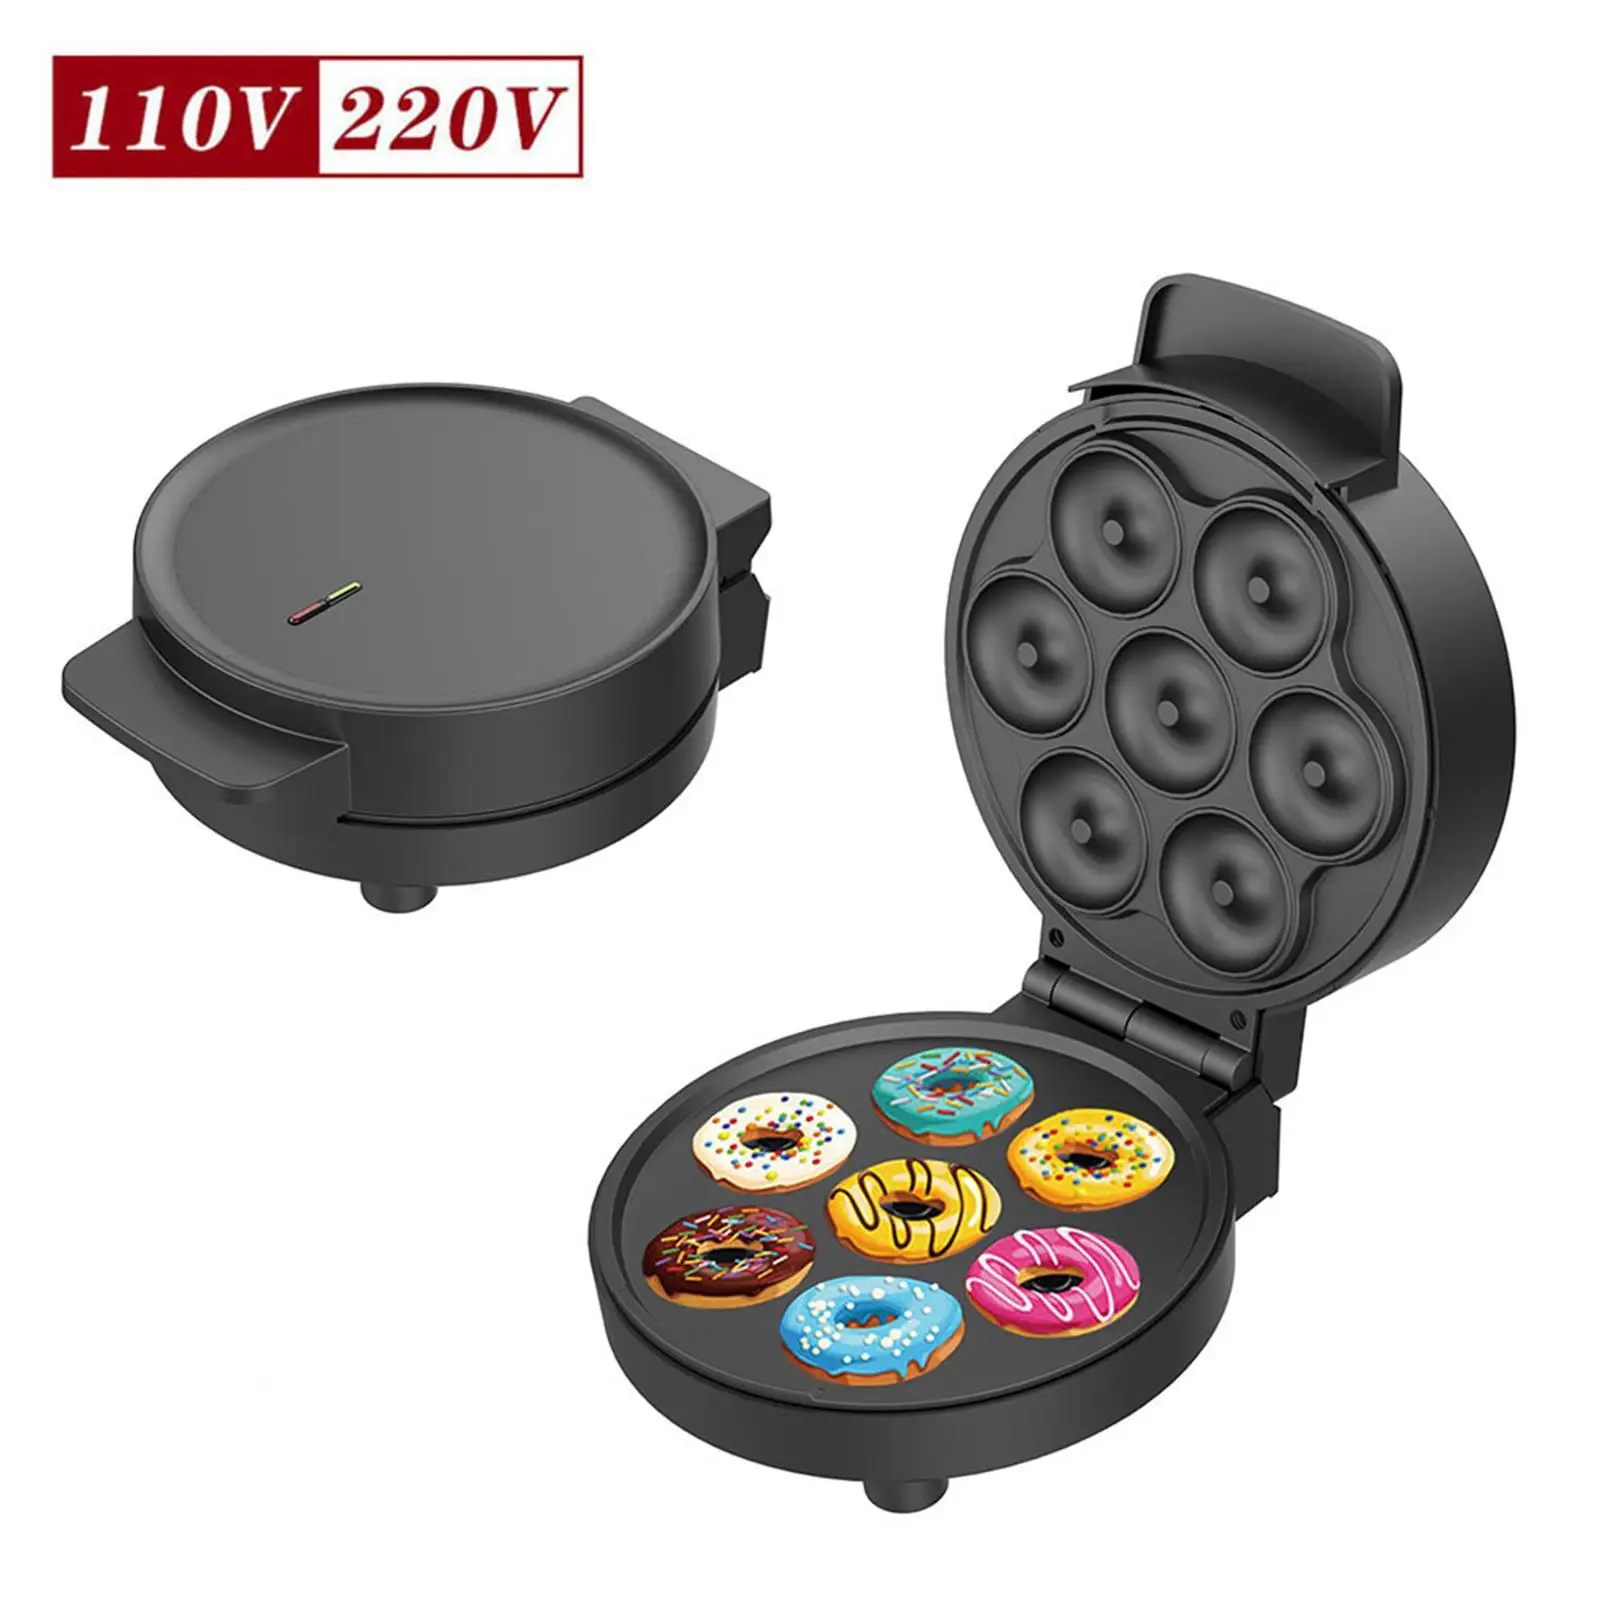 Donut Maker Machine with Indicator Light Makes 7 Doughnuts Double Heating Egg Cake Bread Baking Machine for Commercial Use Snack